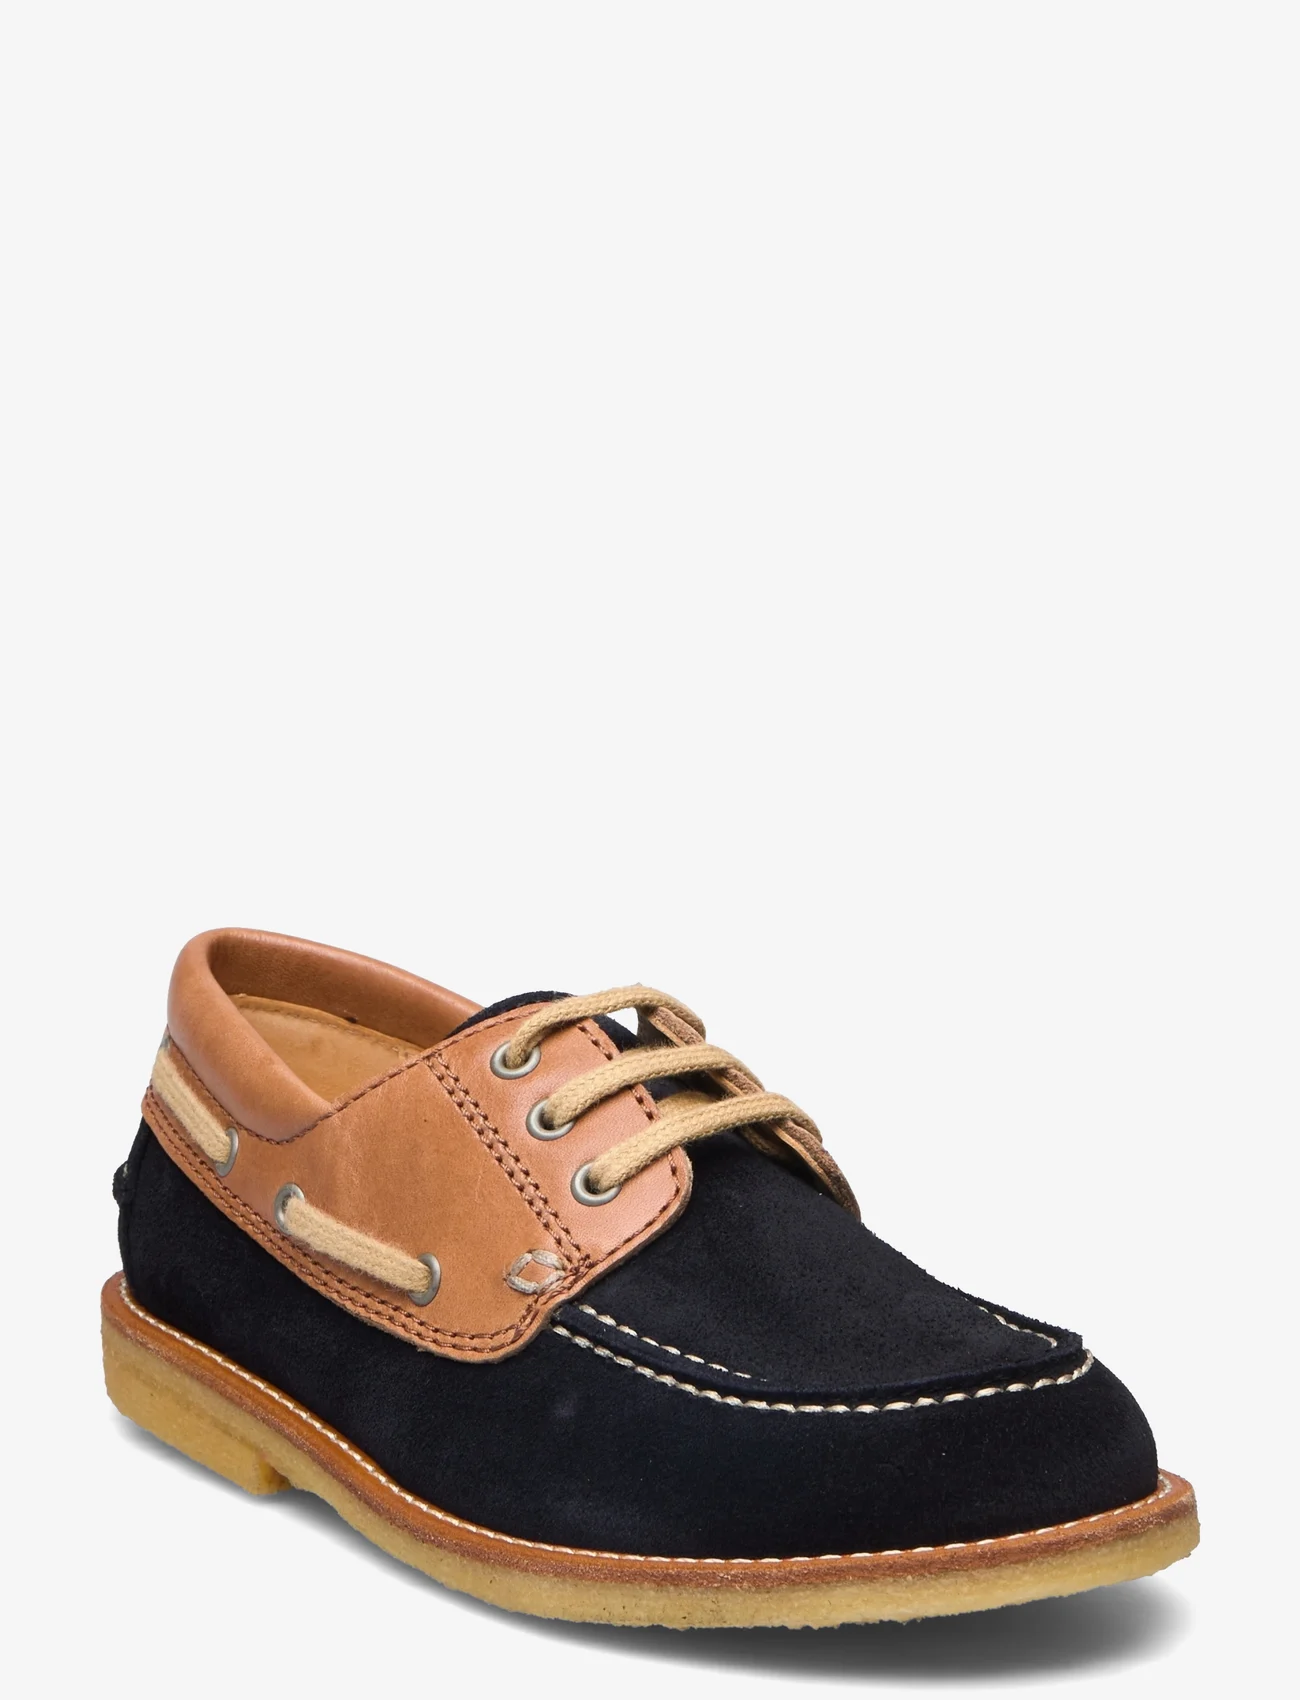 ANGULUS - Shoes - flat - with lace - barn - 2215/1789 navy/cognac - 0